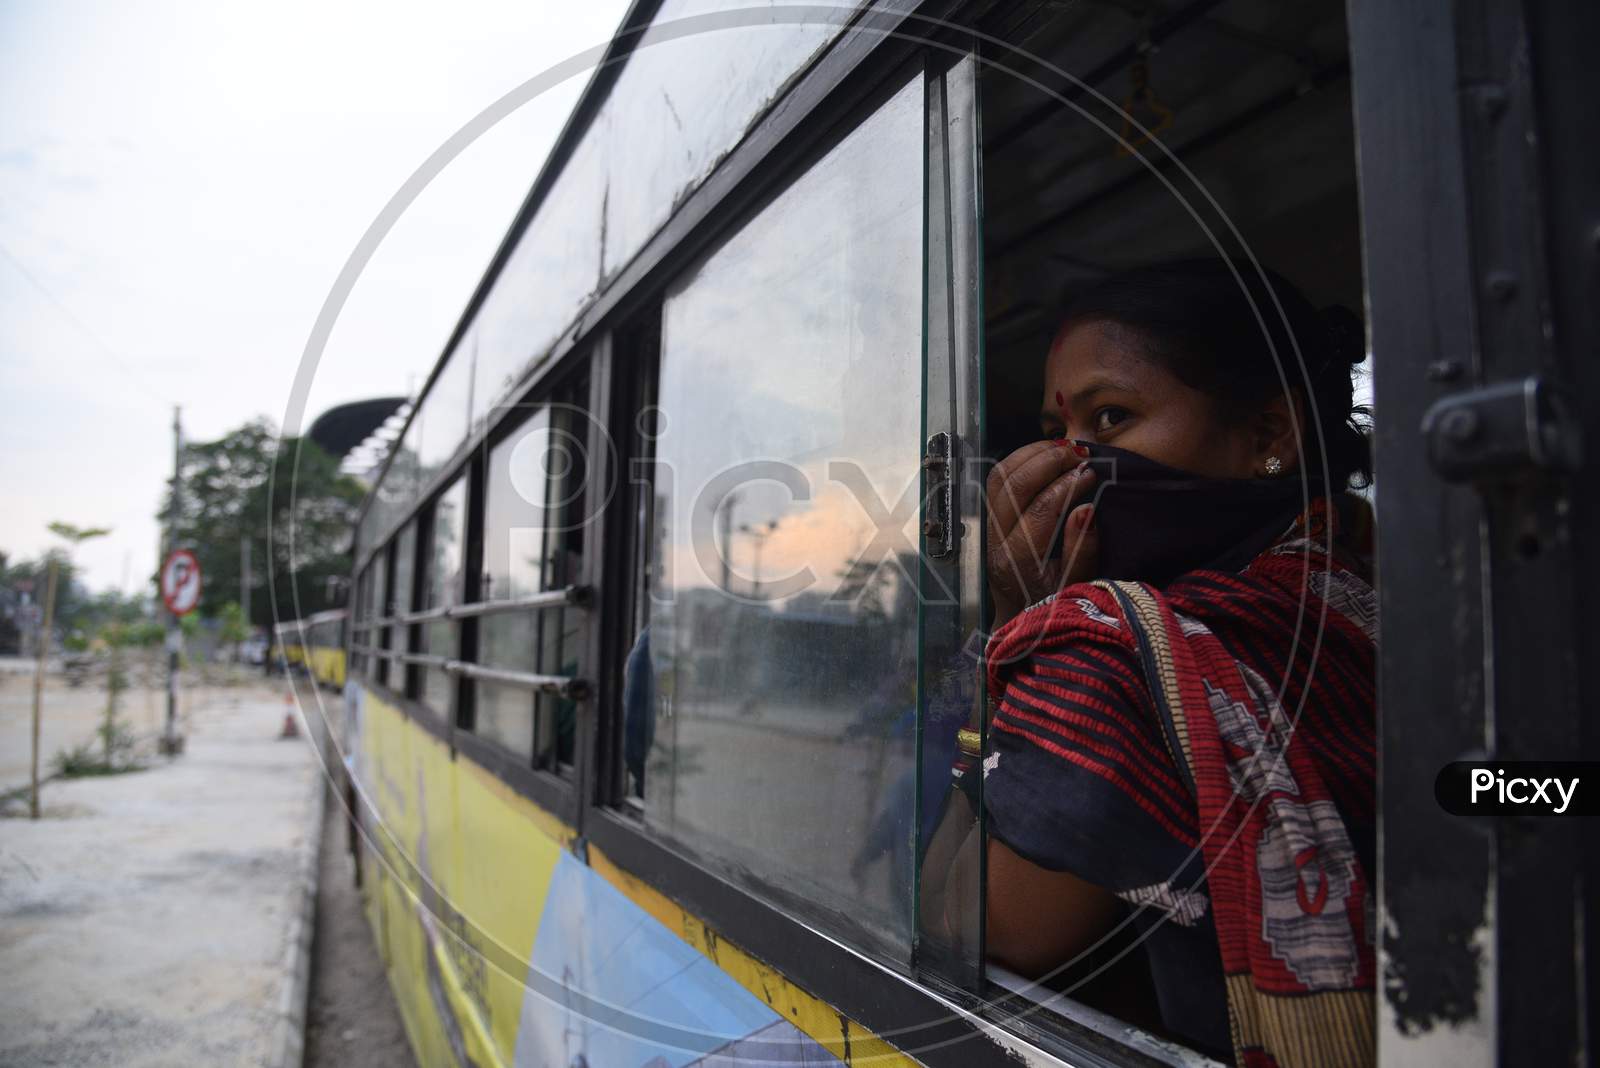 Migrant woman worker waits in a bus after registering from Cyberabad Police to get onto a Shramik Special Train during ongoing Nationwide Lockdown amid Coronavirus Pandemic, Kukatpally,Hyderabad, May 19,2020.